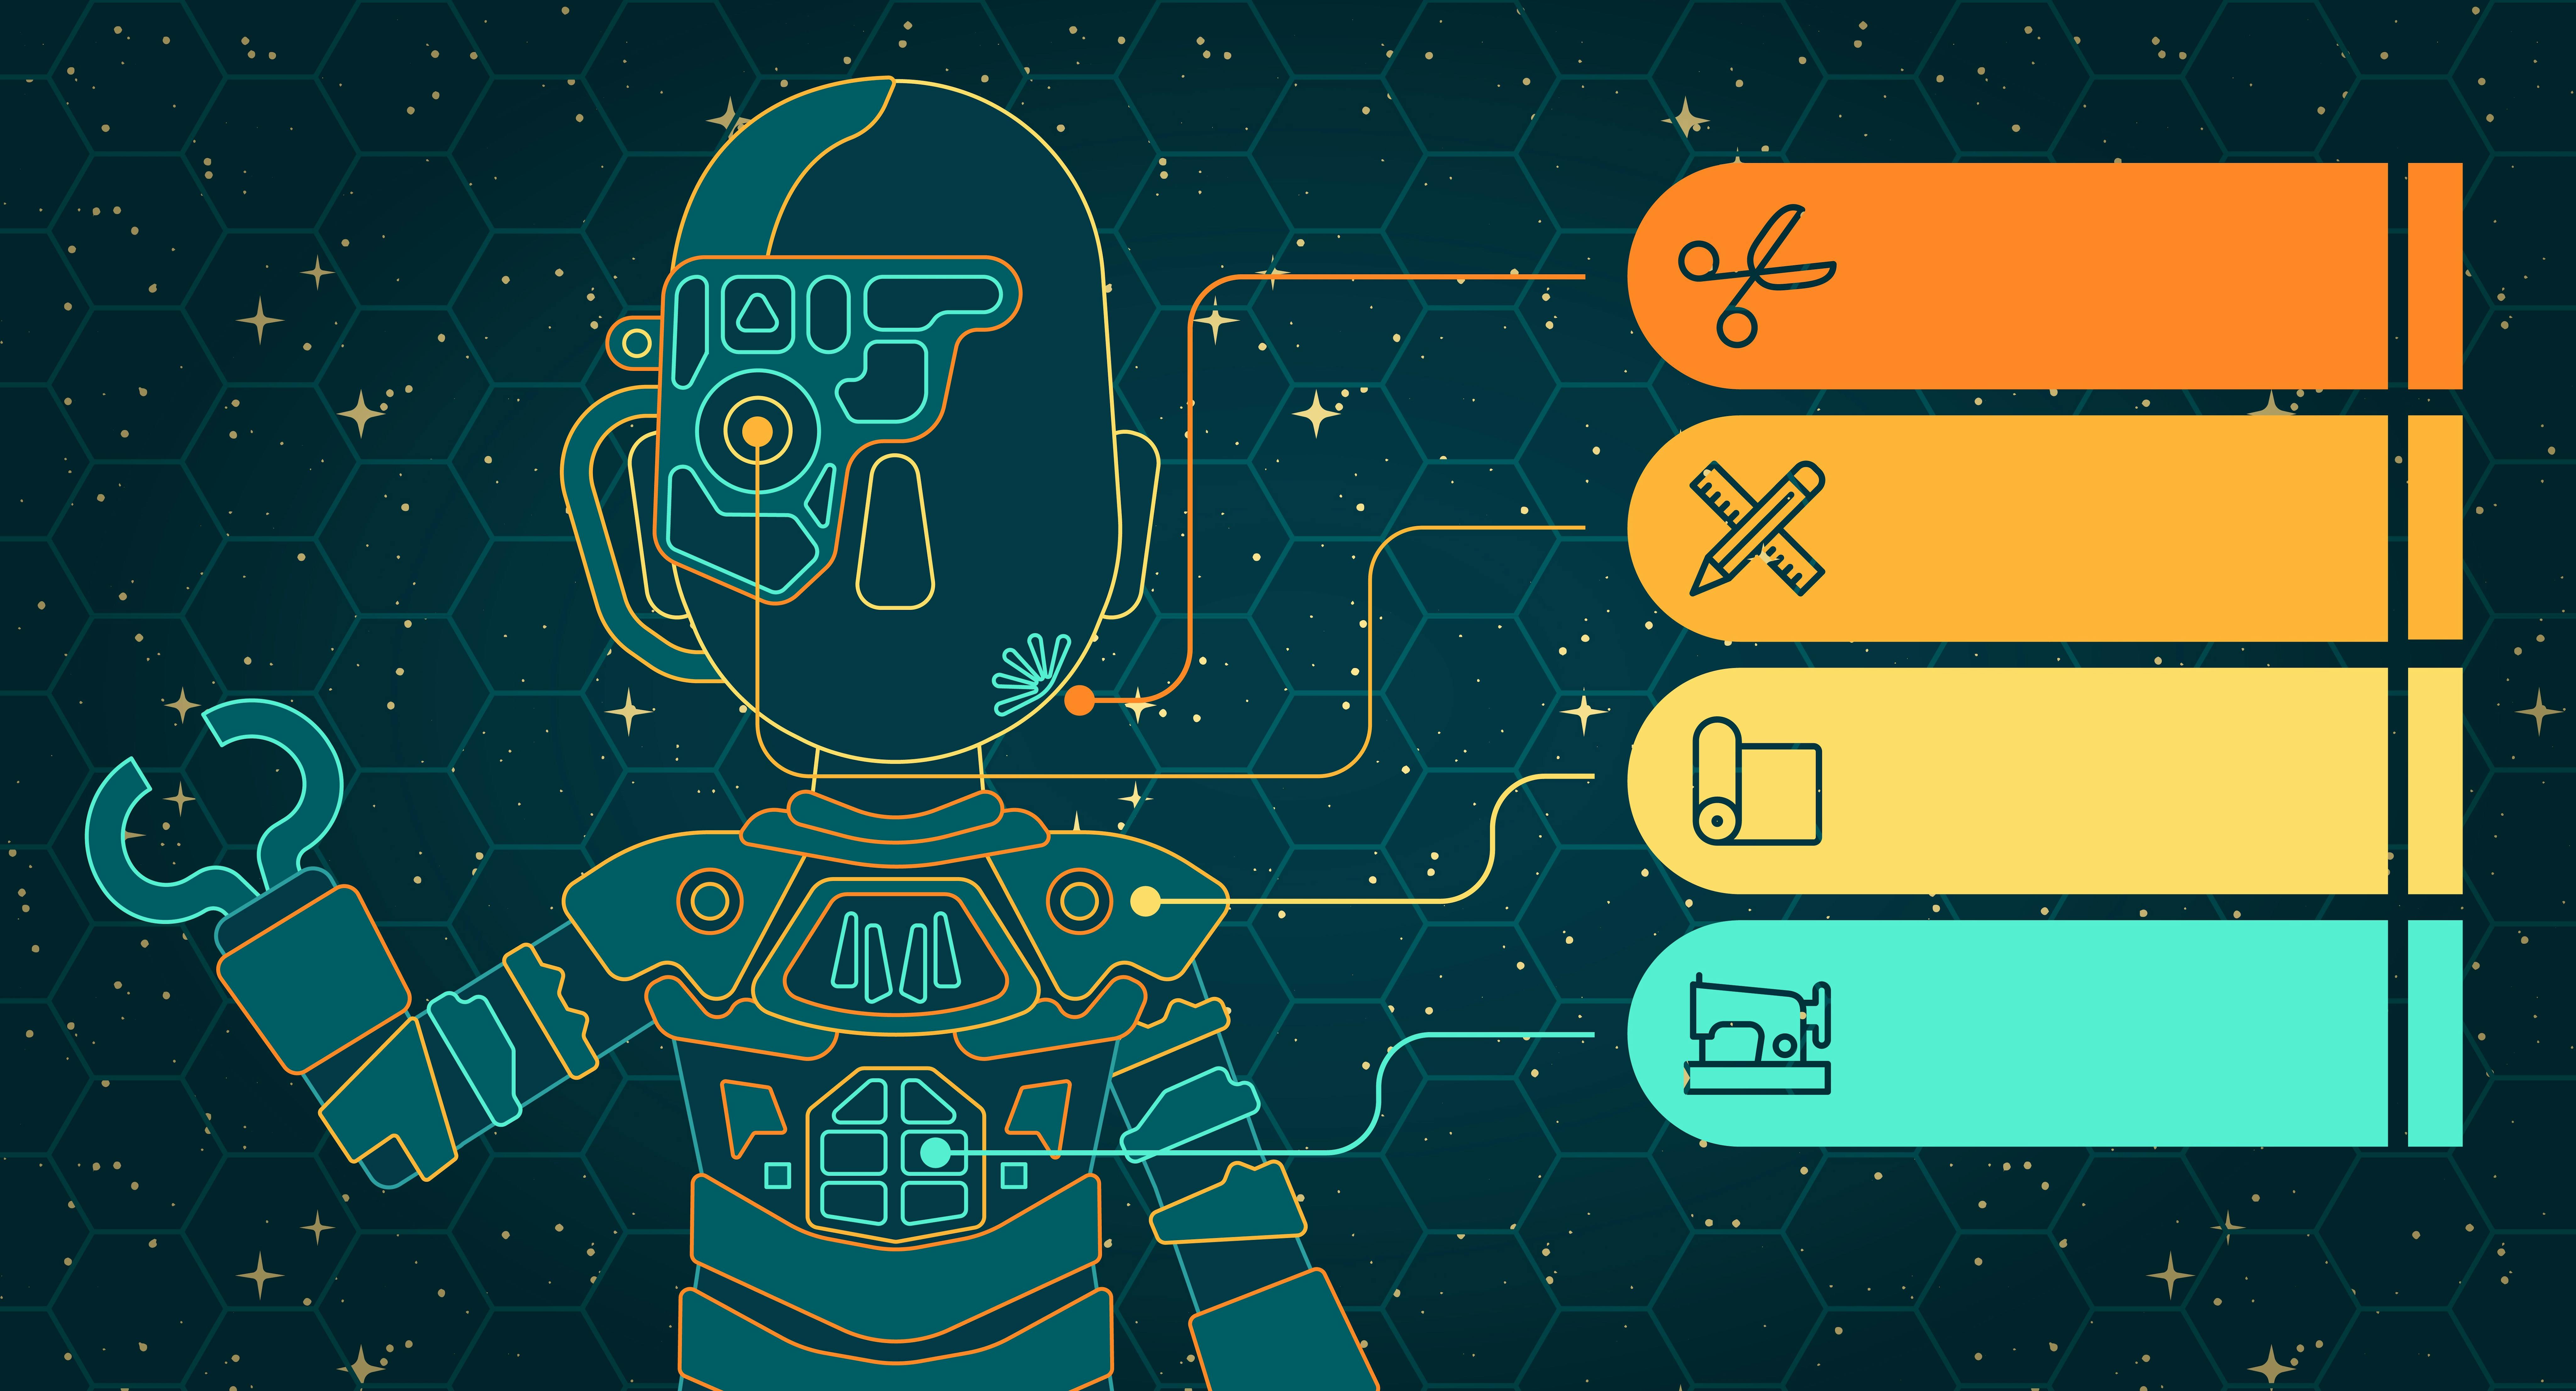 Illustrated banner on how to build your own budget Borg